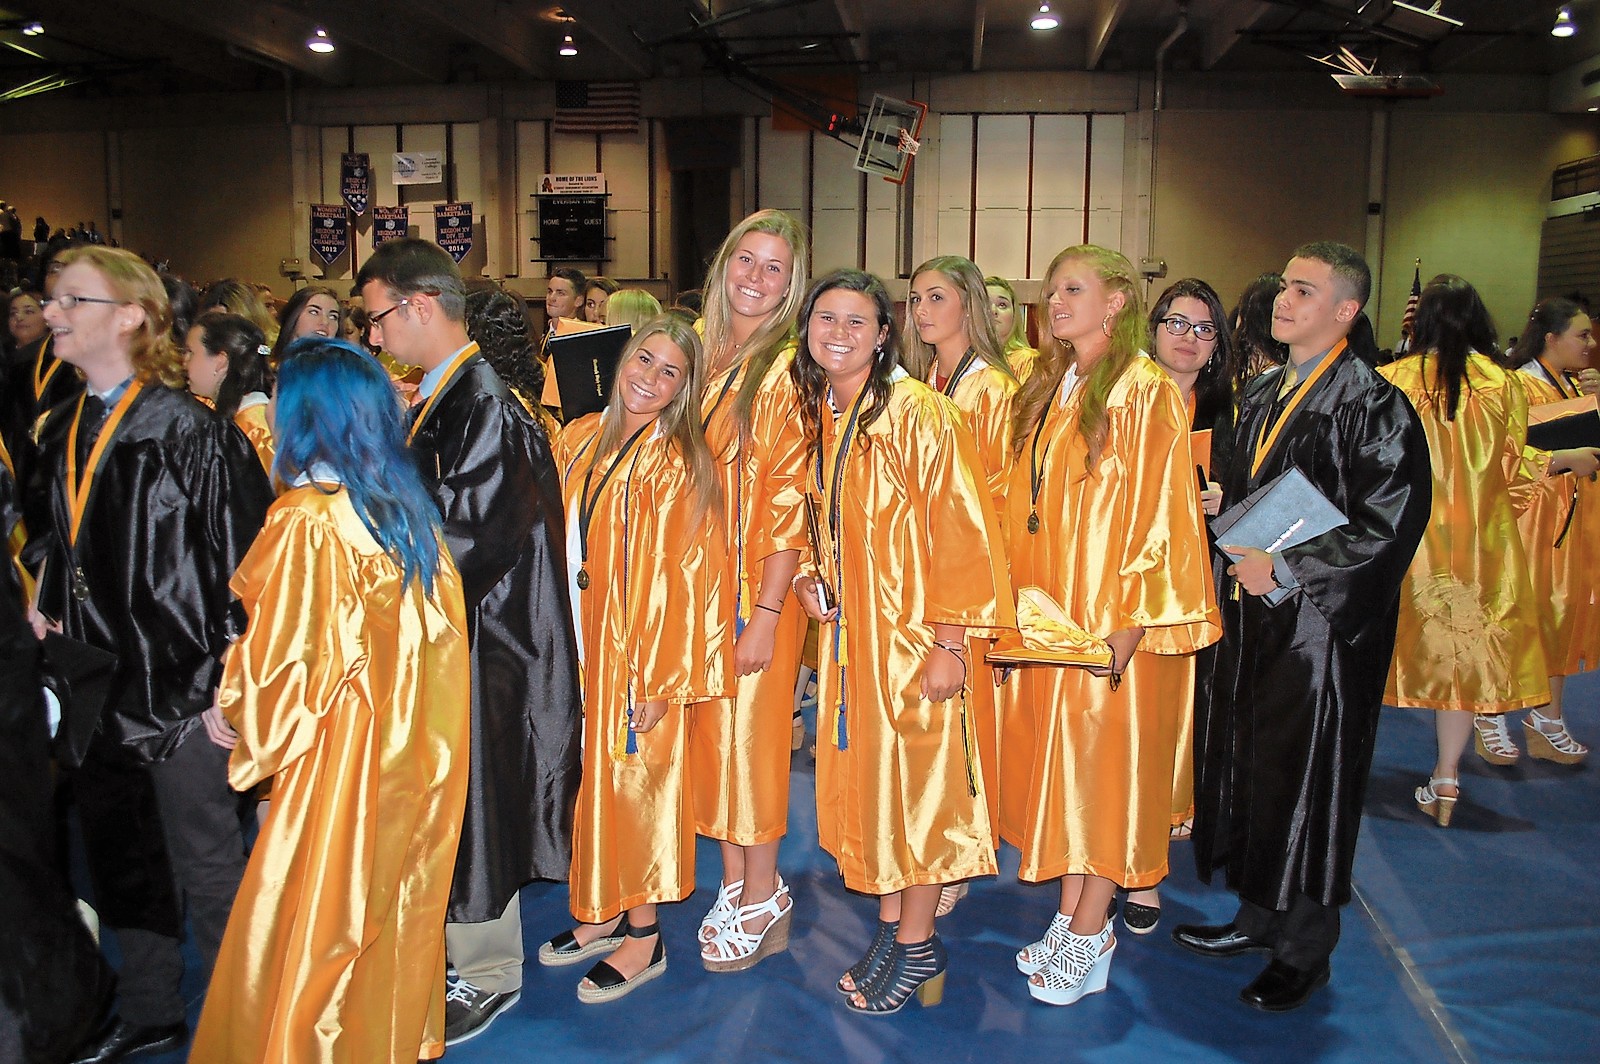 Graduates were all smiles after getting their diplomas.